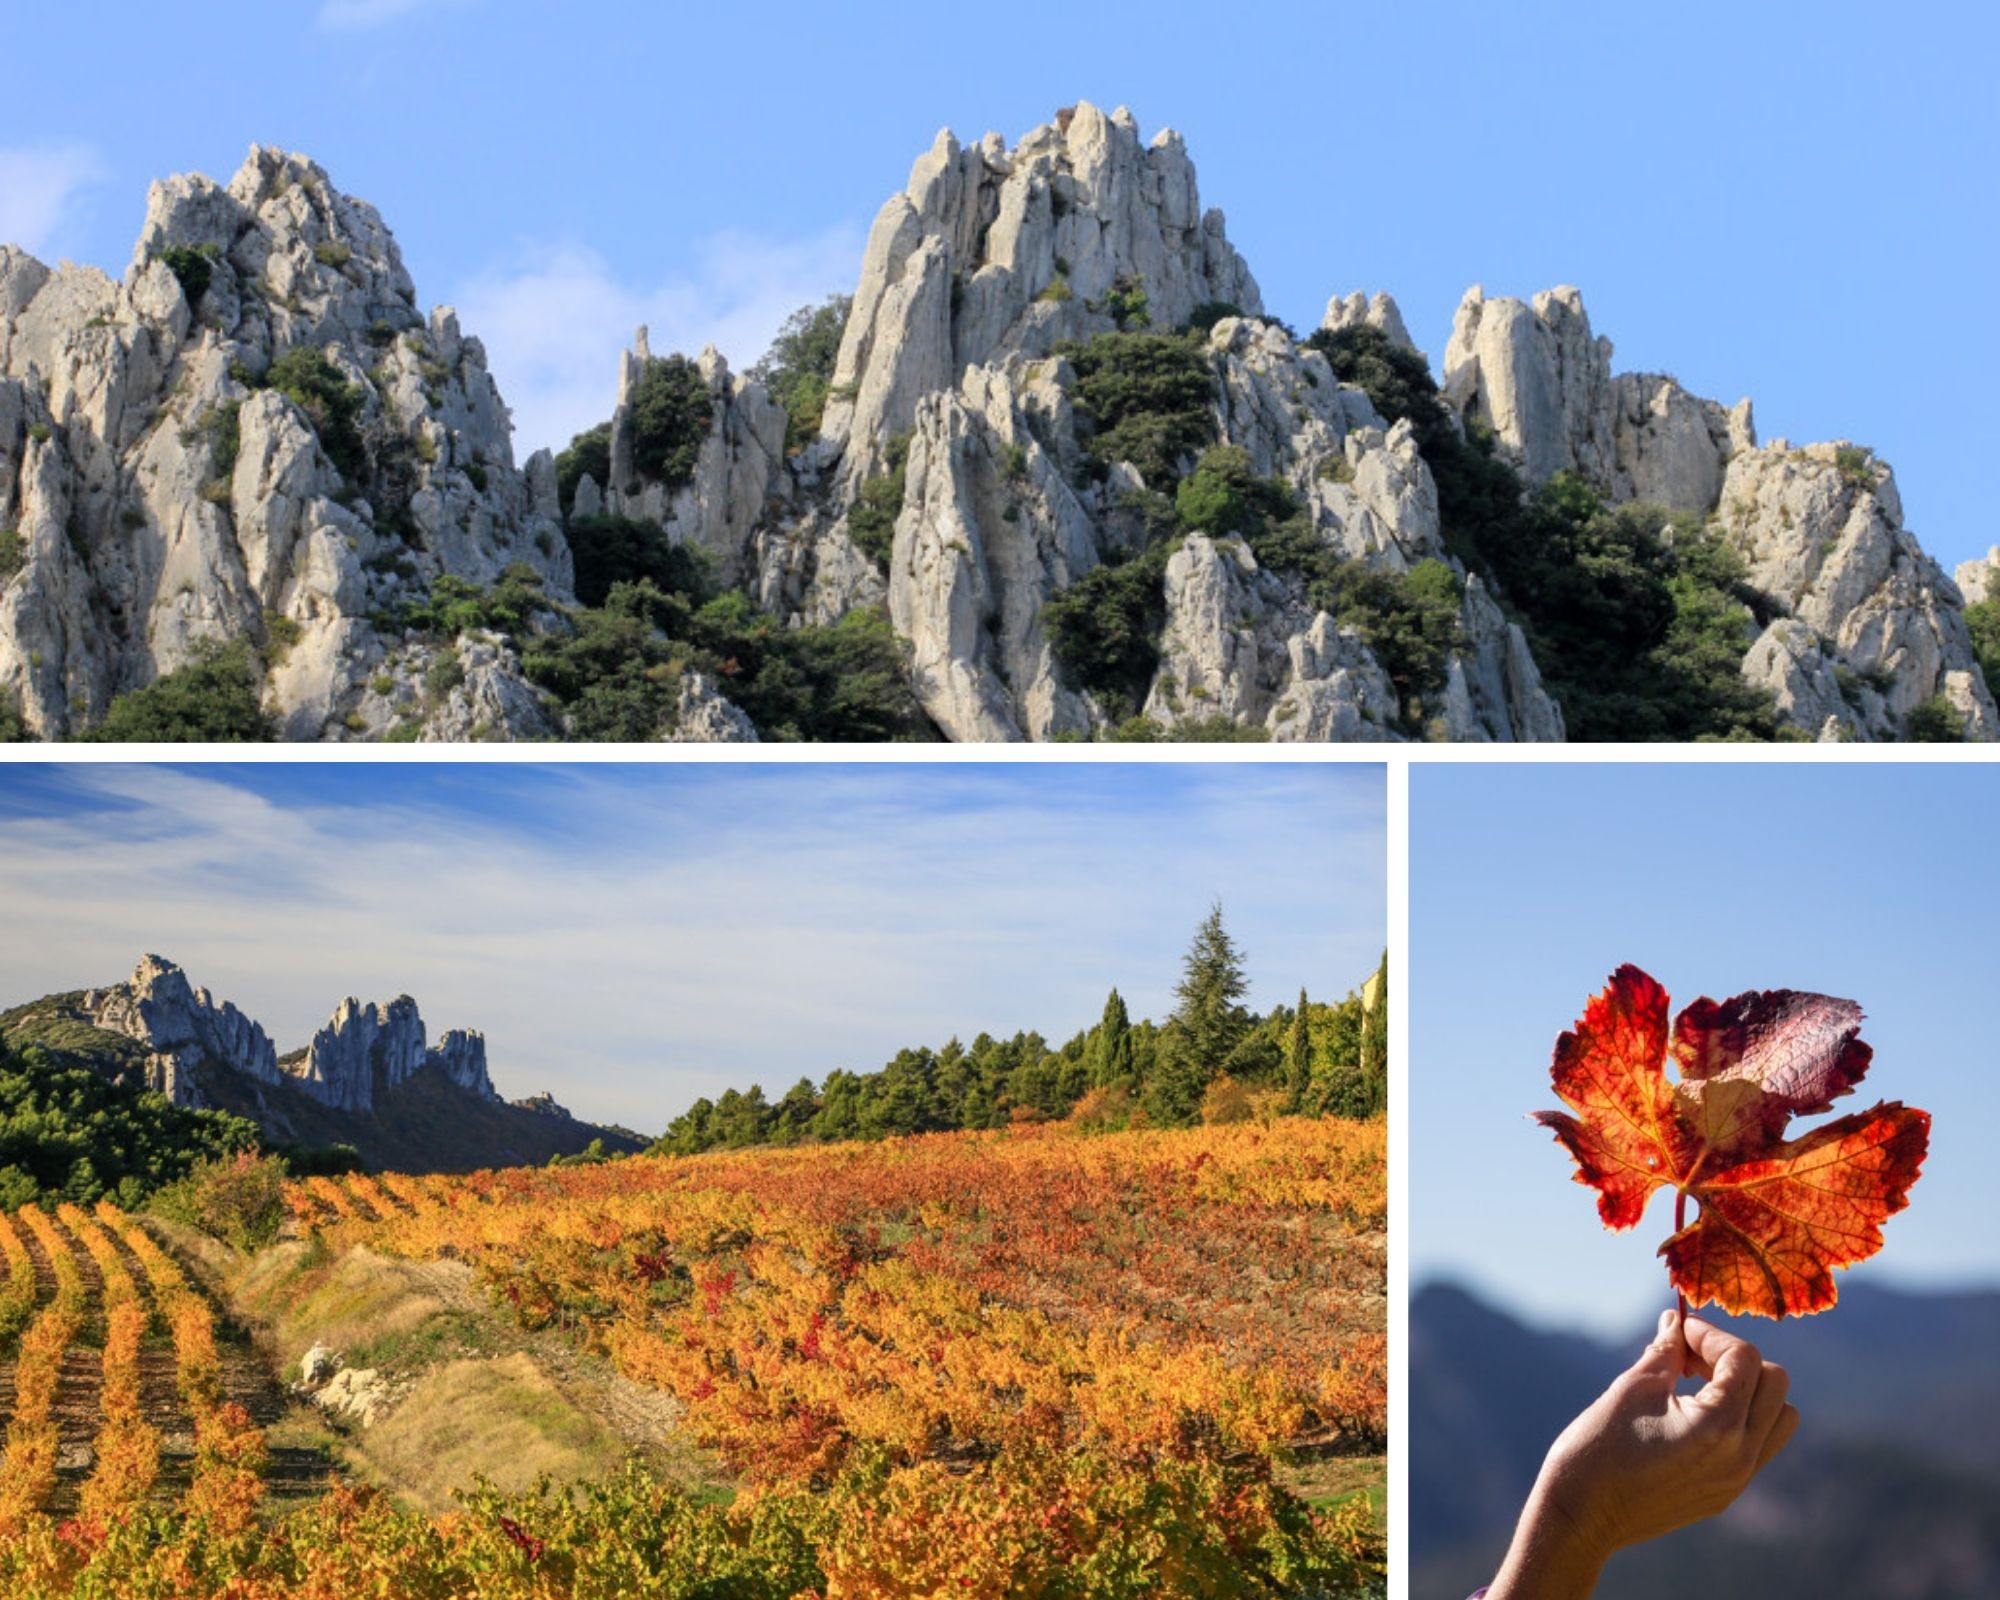 Discovering the Dentelles of Montmirail